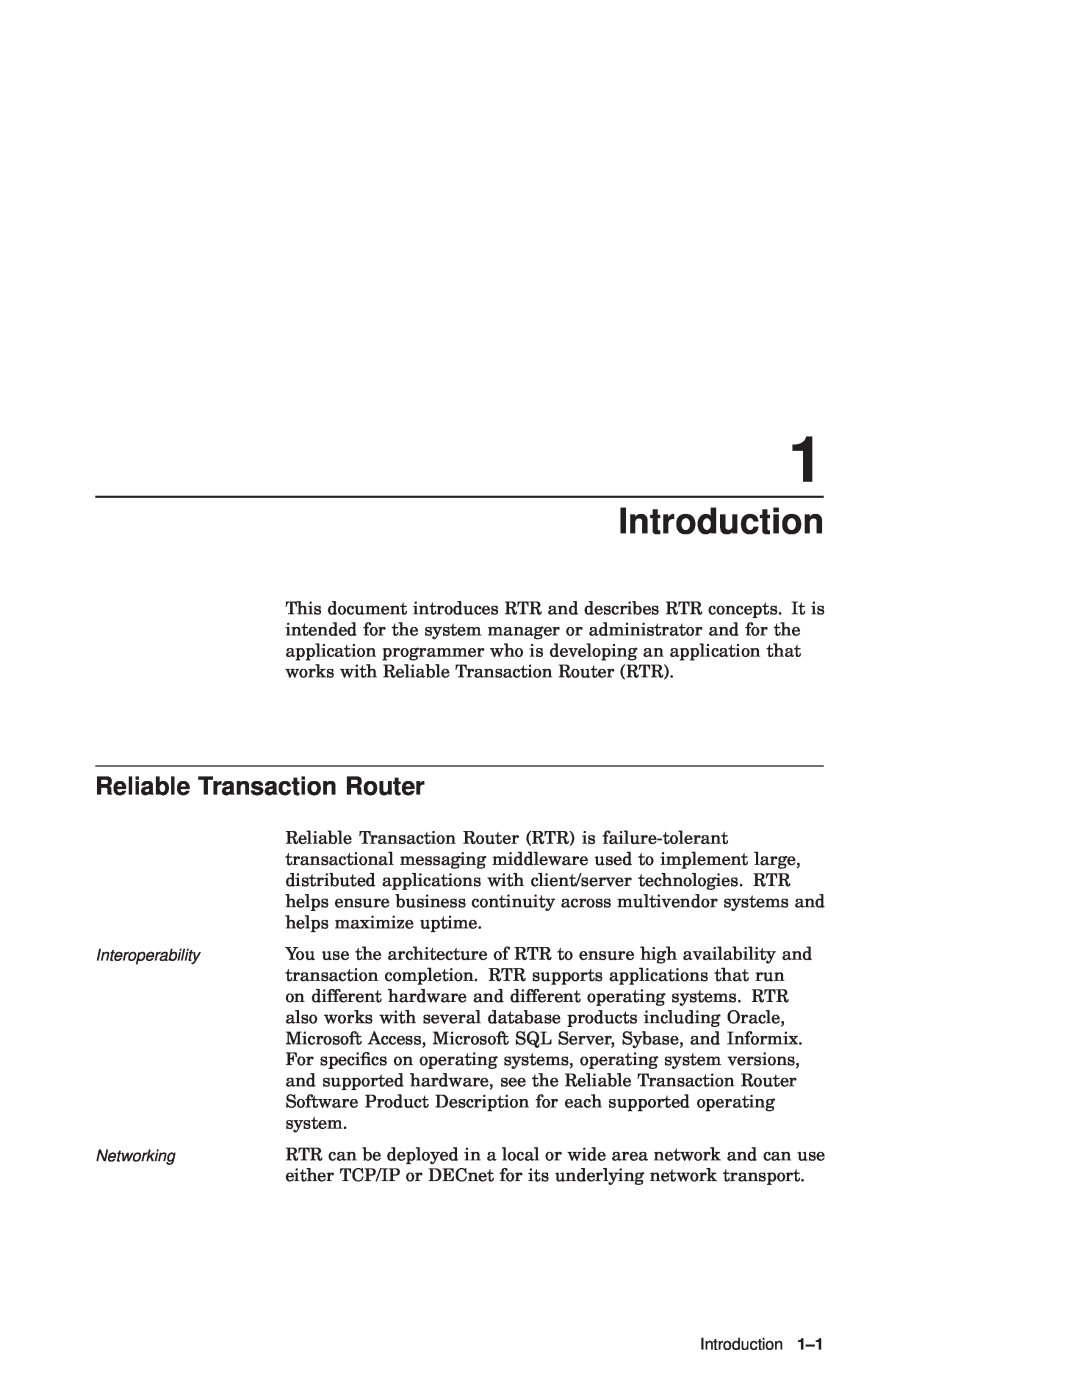 Compaq Reliable Transaction Router manual Introduction 